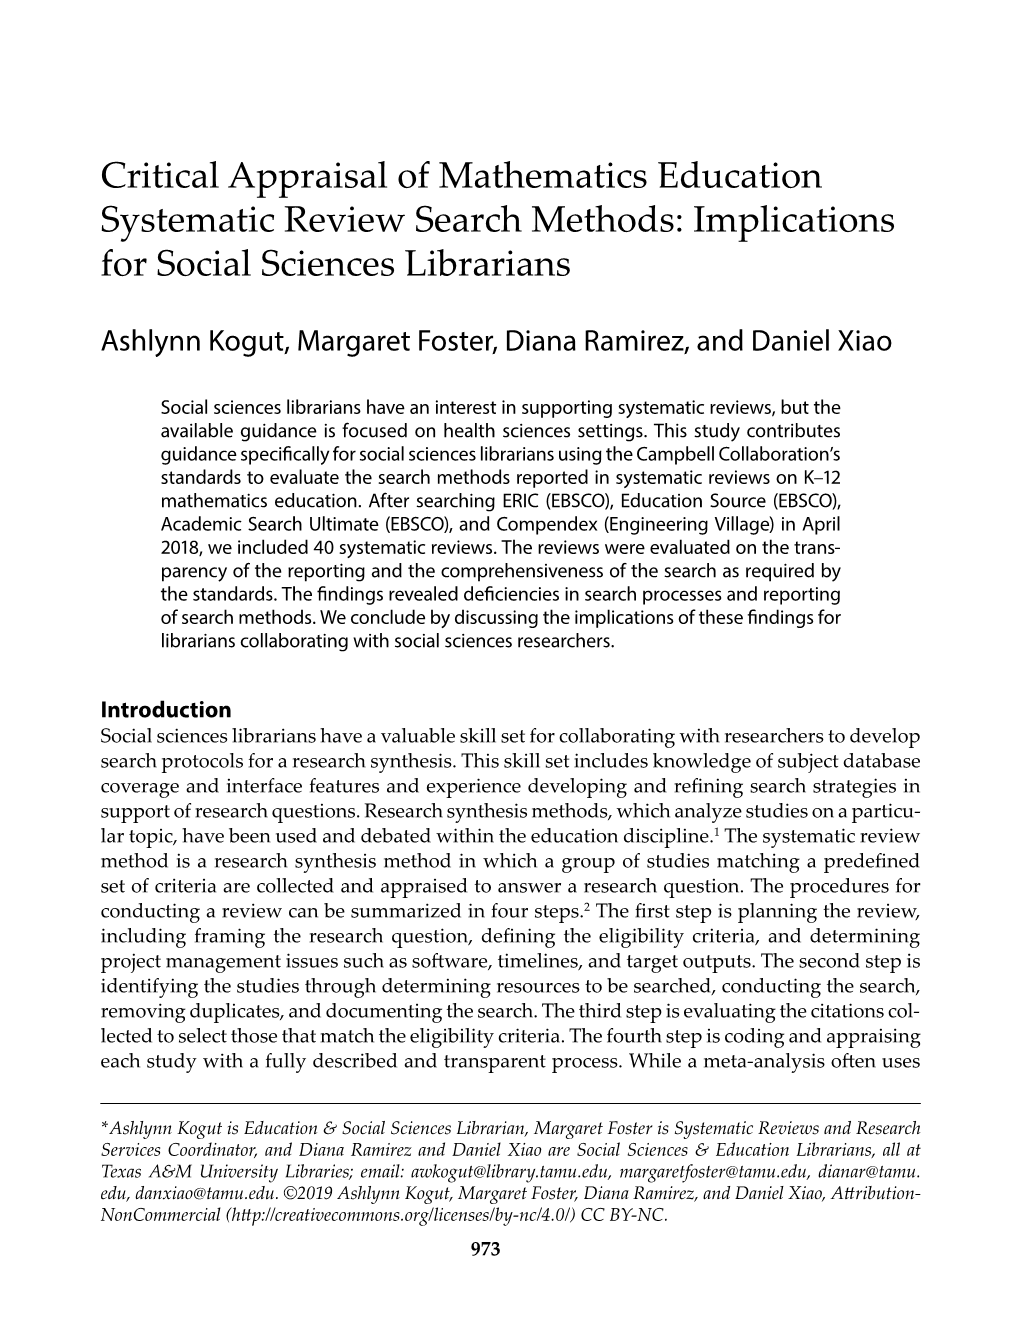 Critical Appraisal of Mathematics Education Systematic Review Search Methods: Implications for Social Sciences Librarians